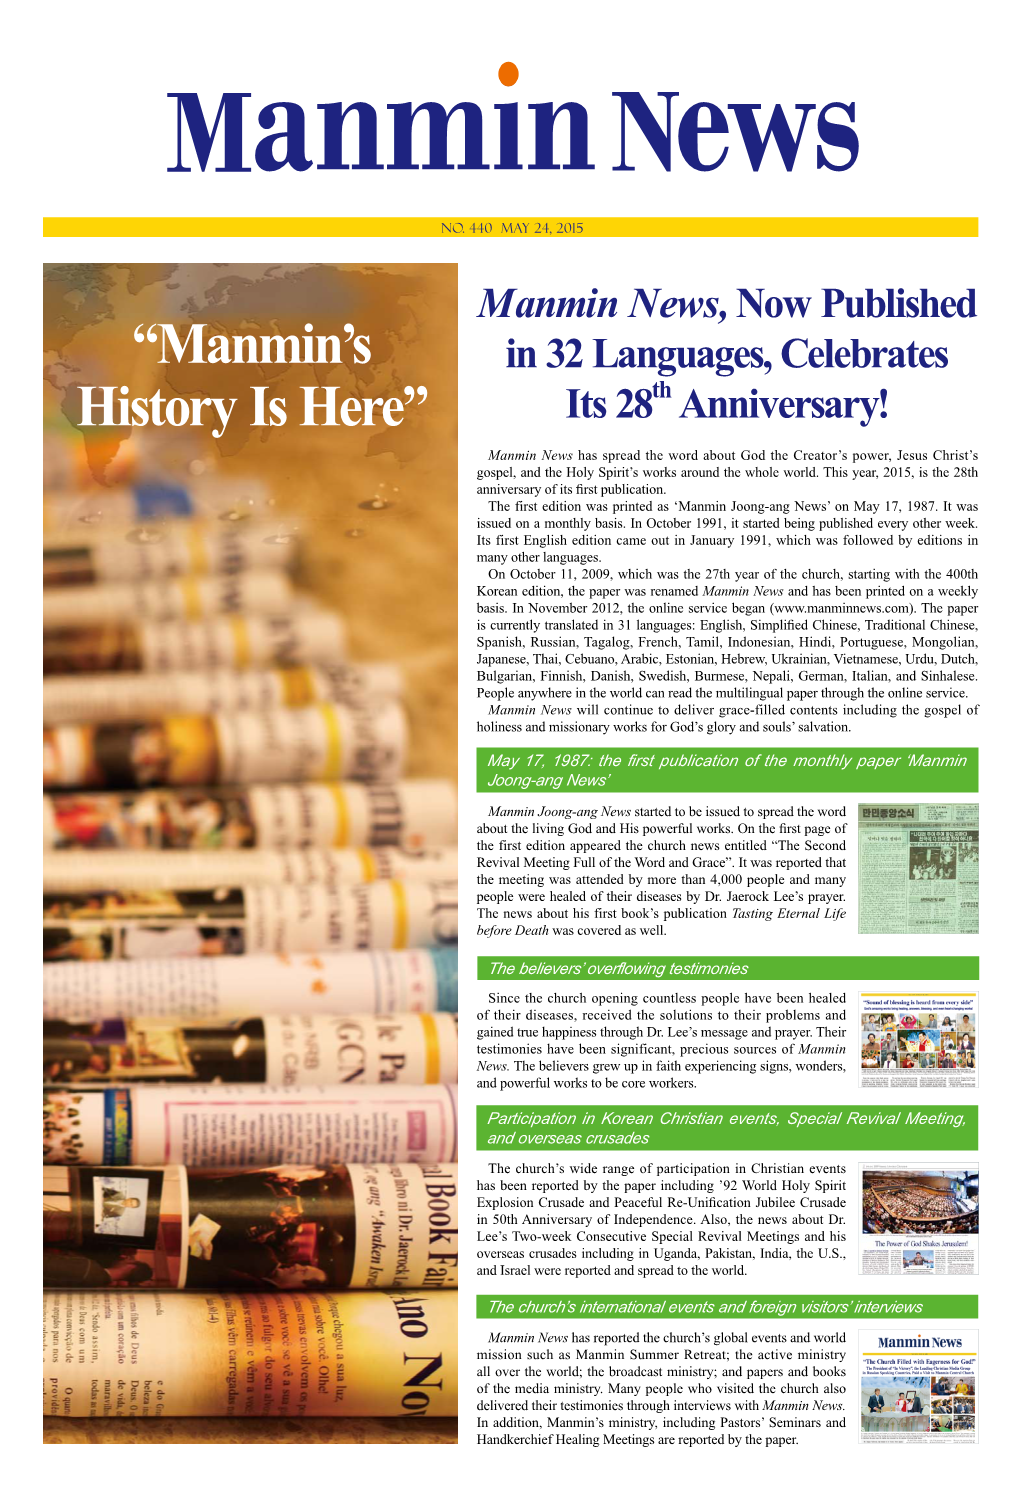 “Manmin's History Is Here”